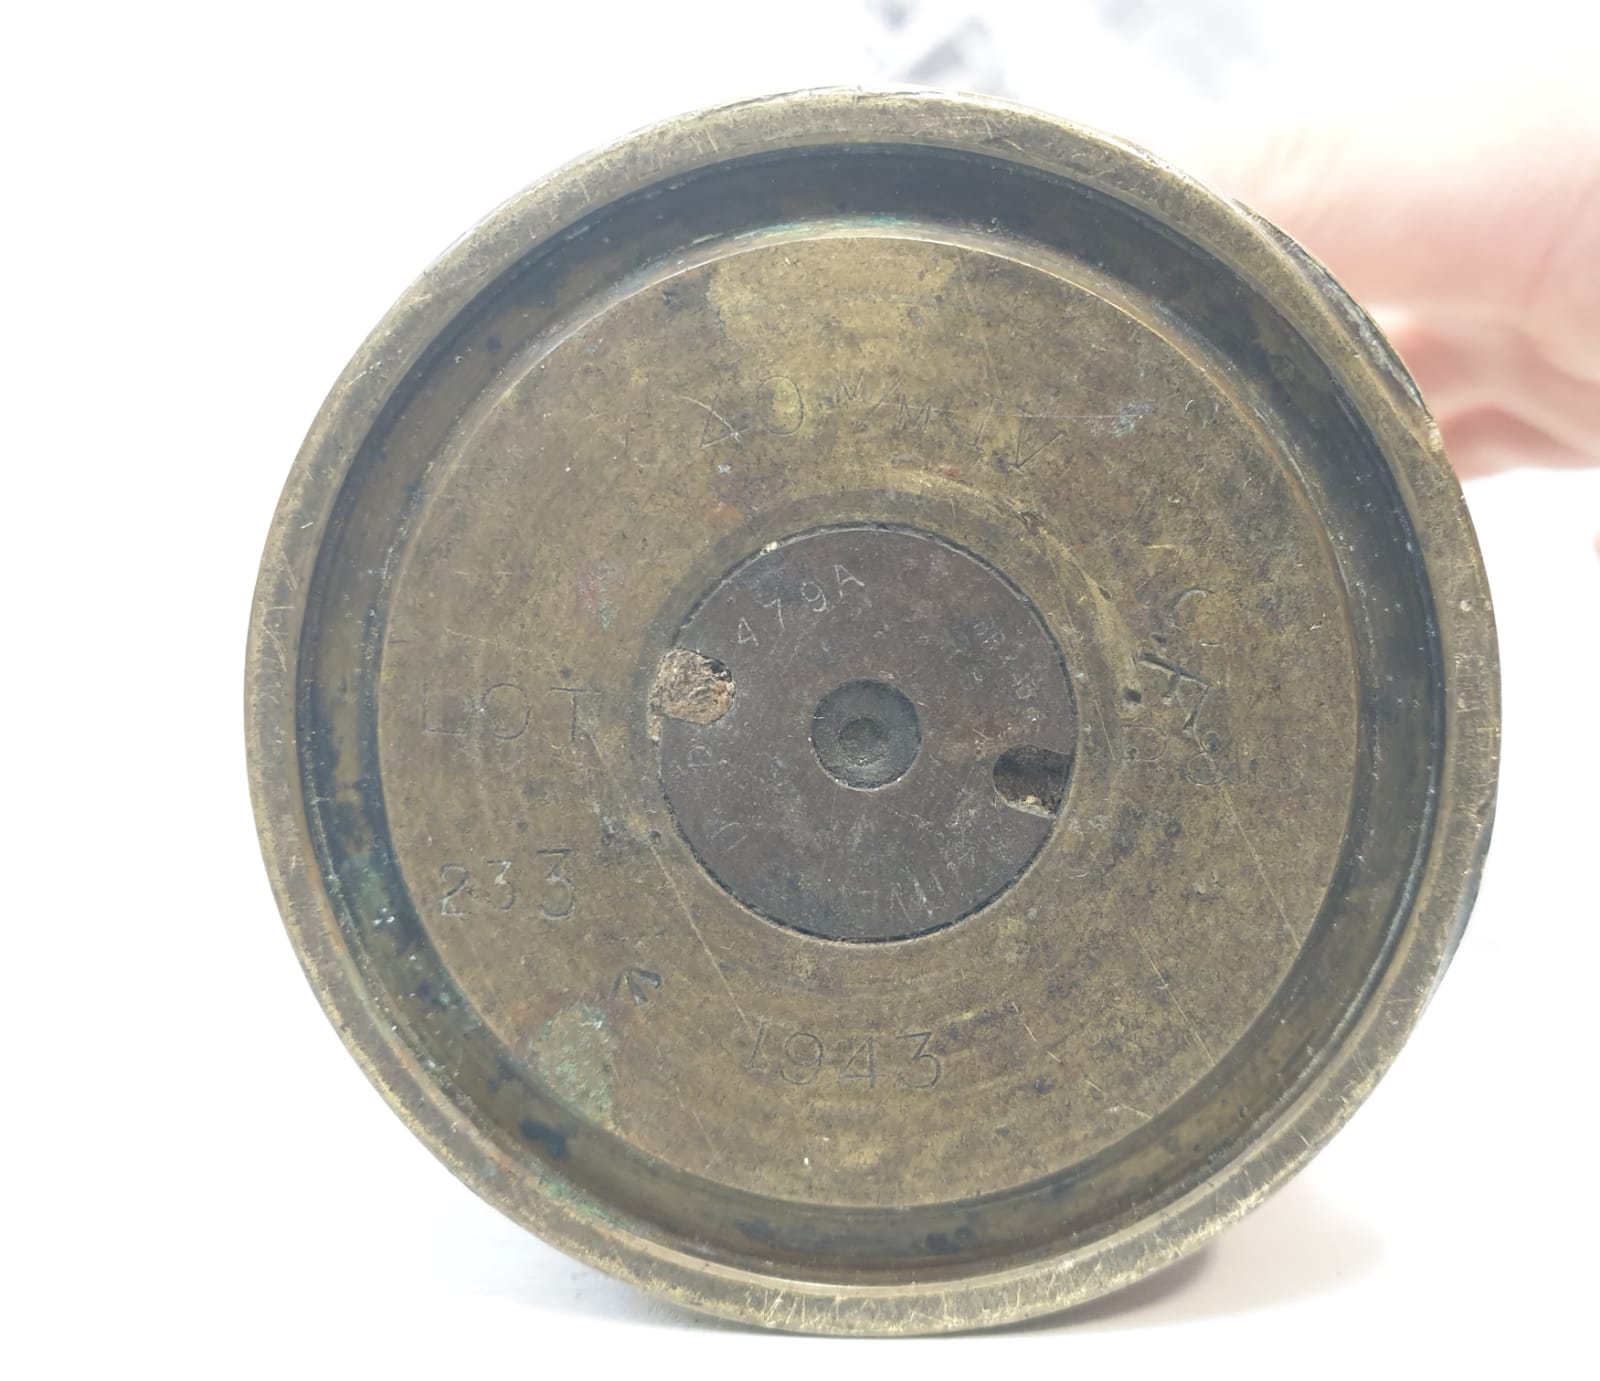 INERT WW2 Bofors Anti Aircraft Round Dated 1943. Empty Shell Case With Resin Head - Image 6 of 7